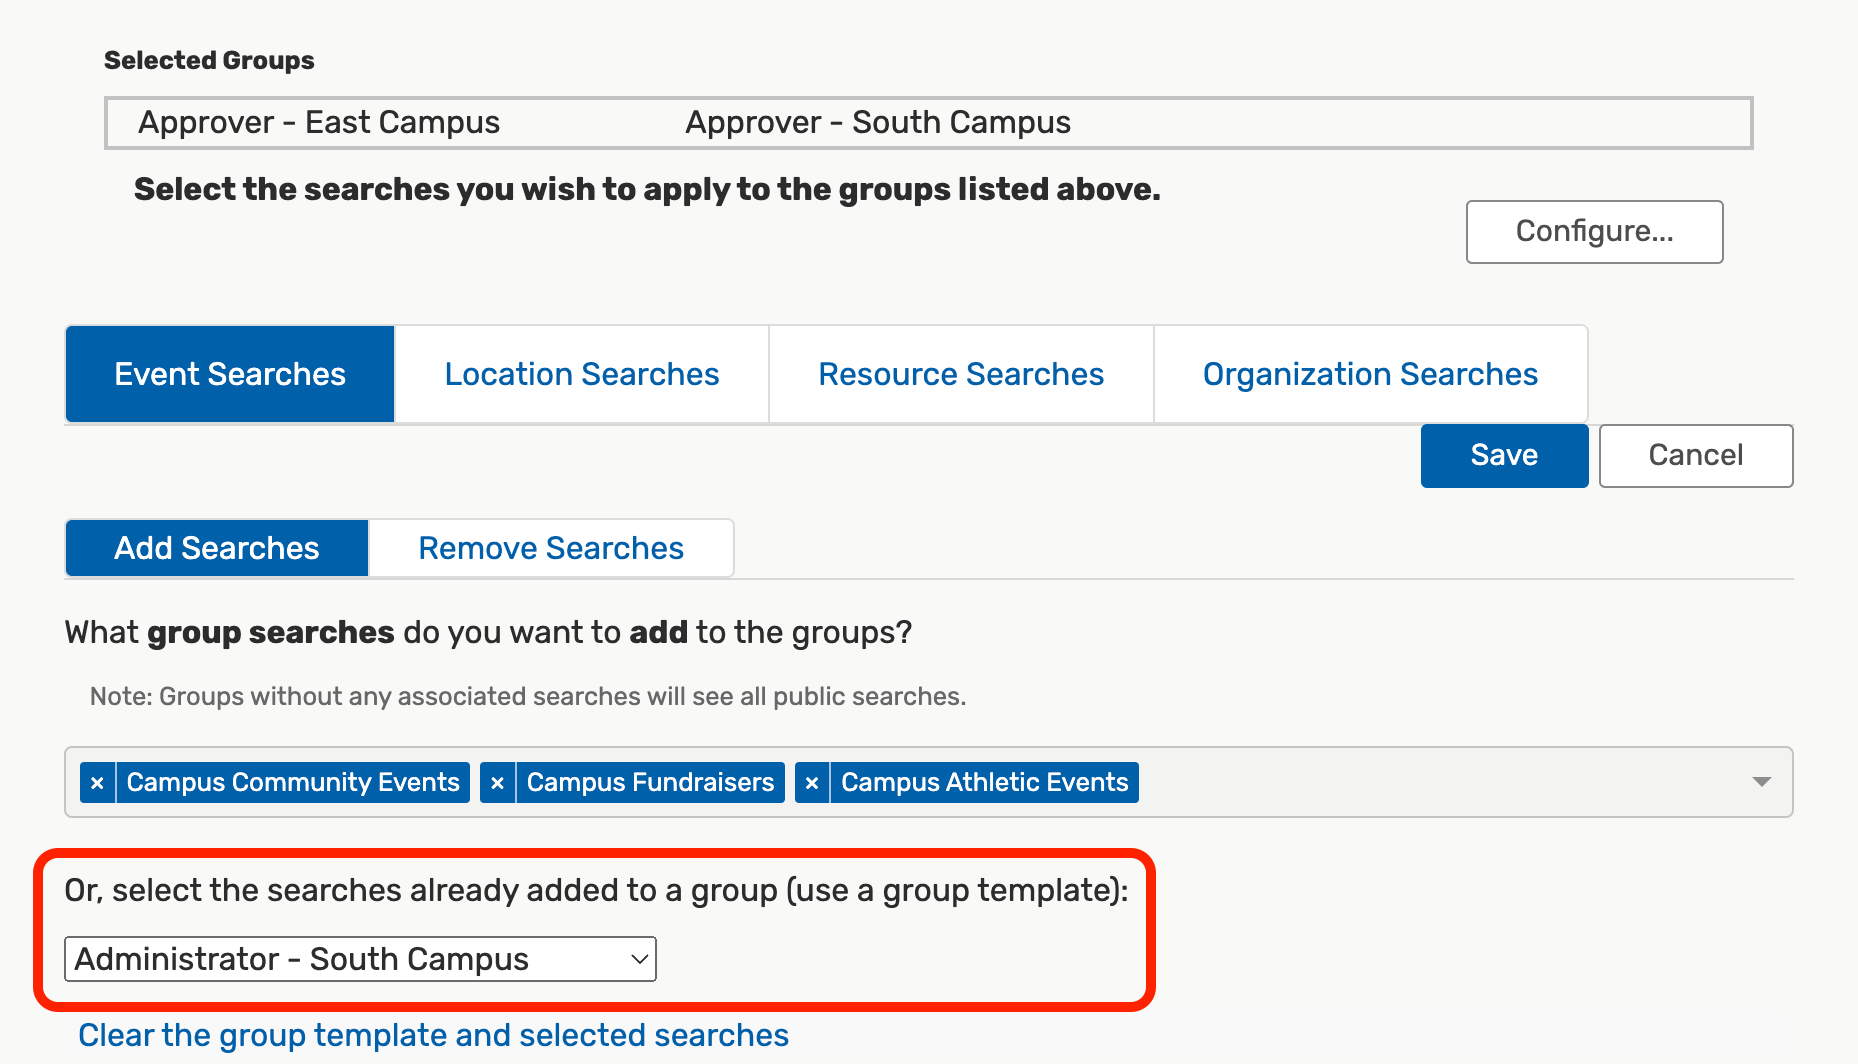 Select the searches already added to a group (use a group template) dropdown